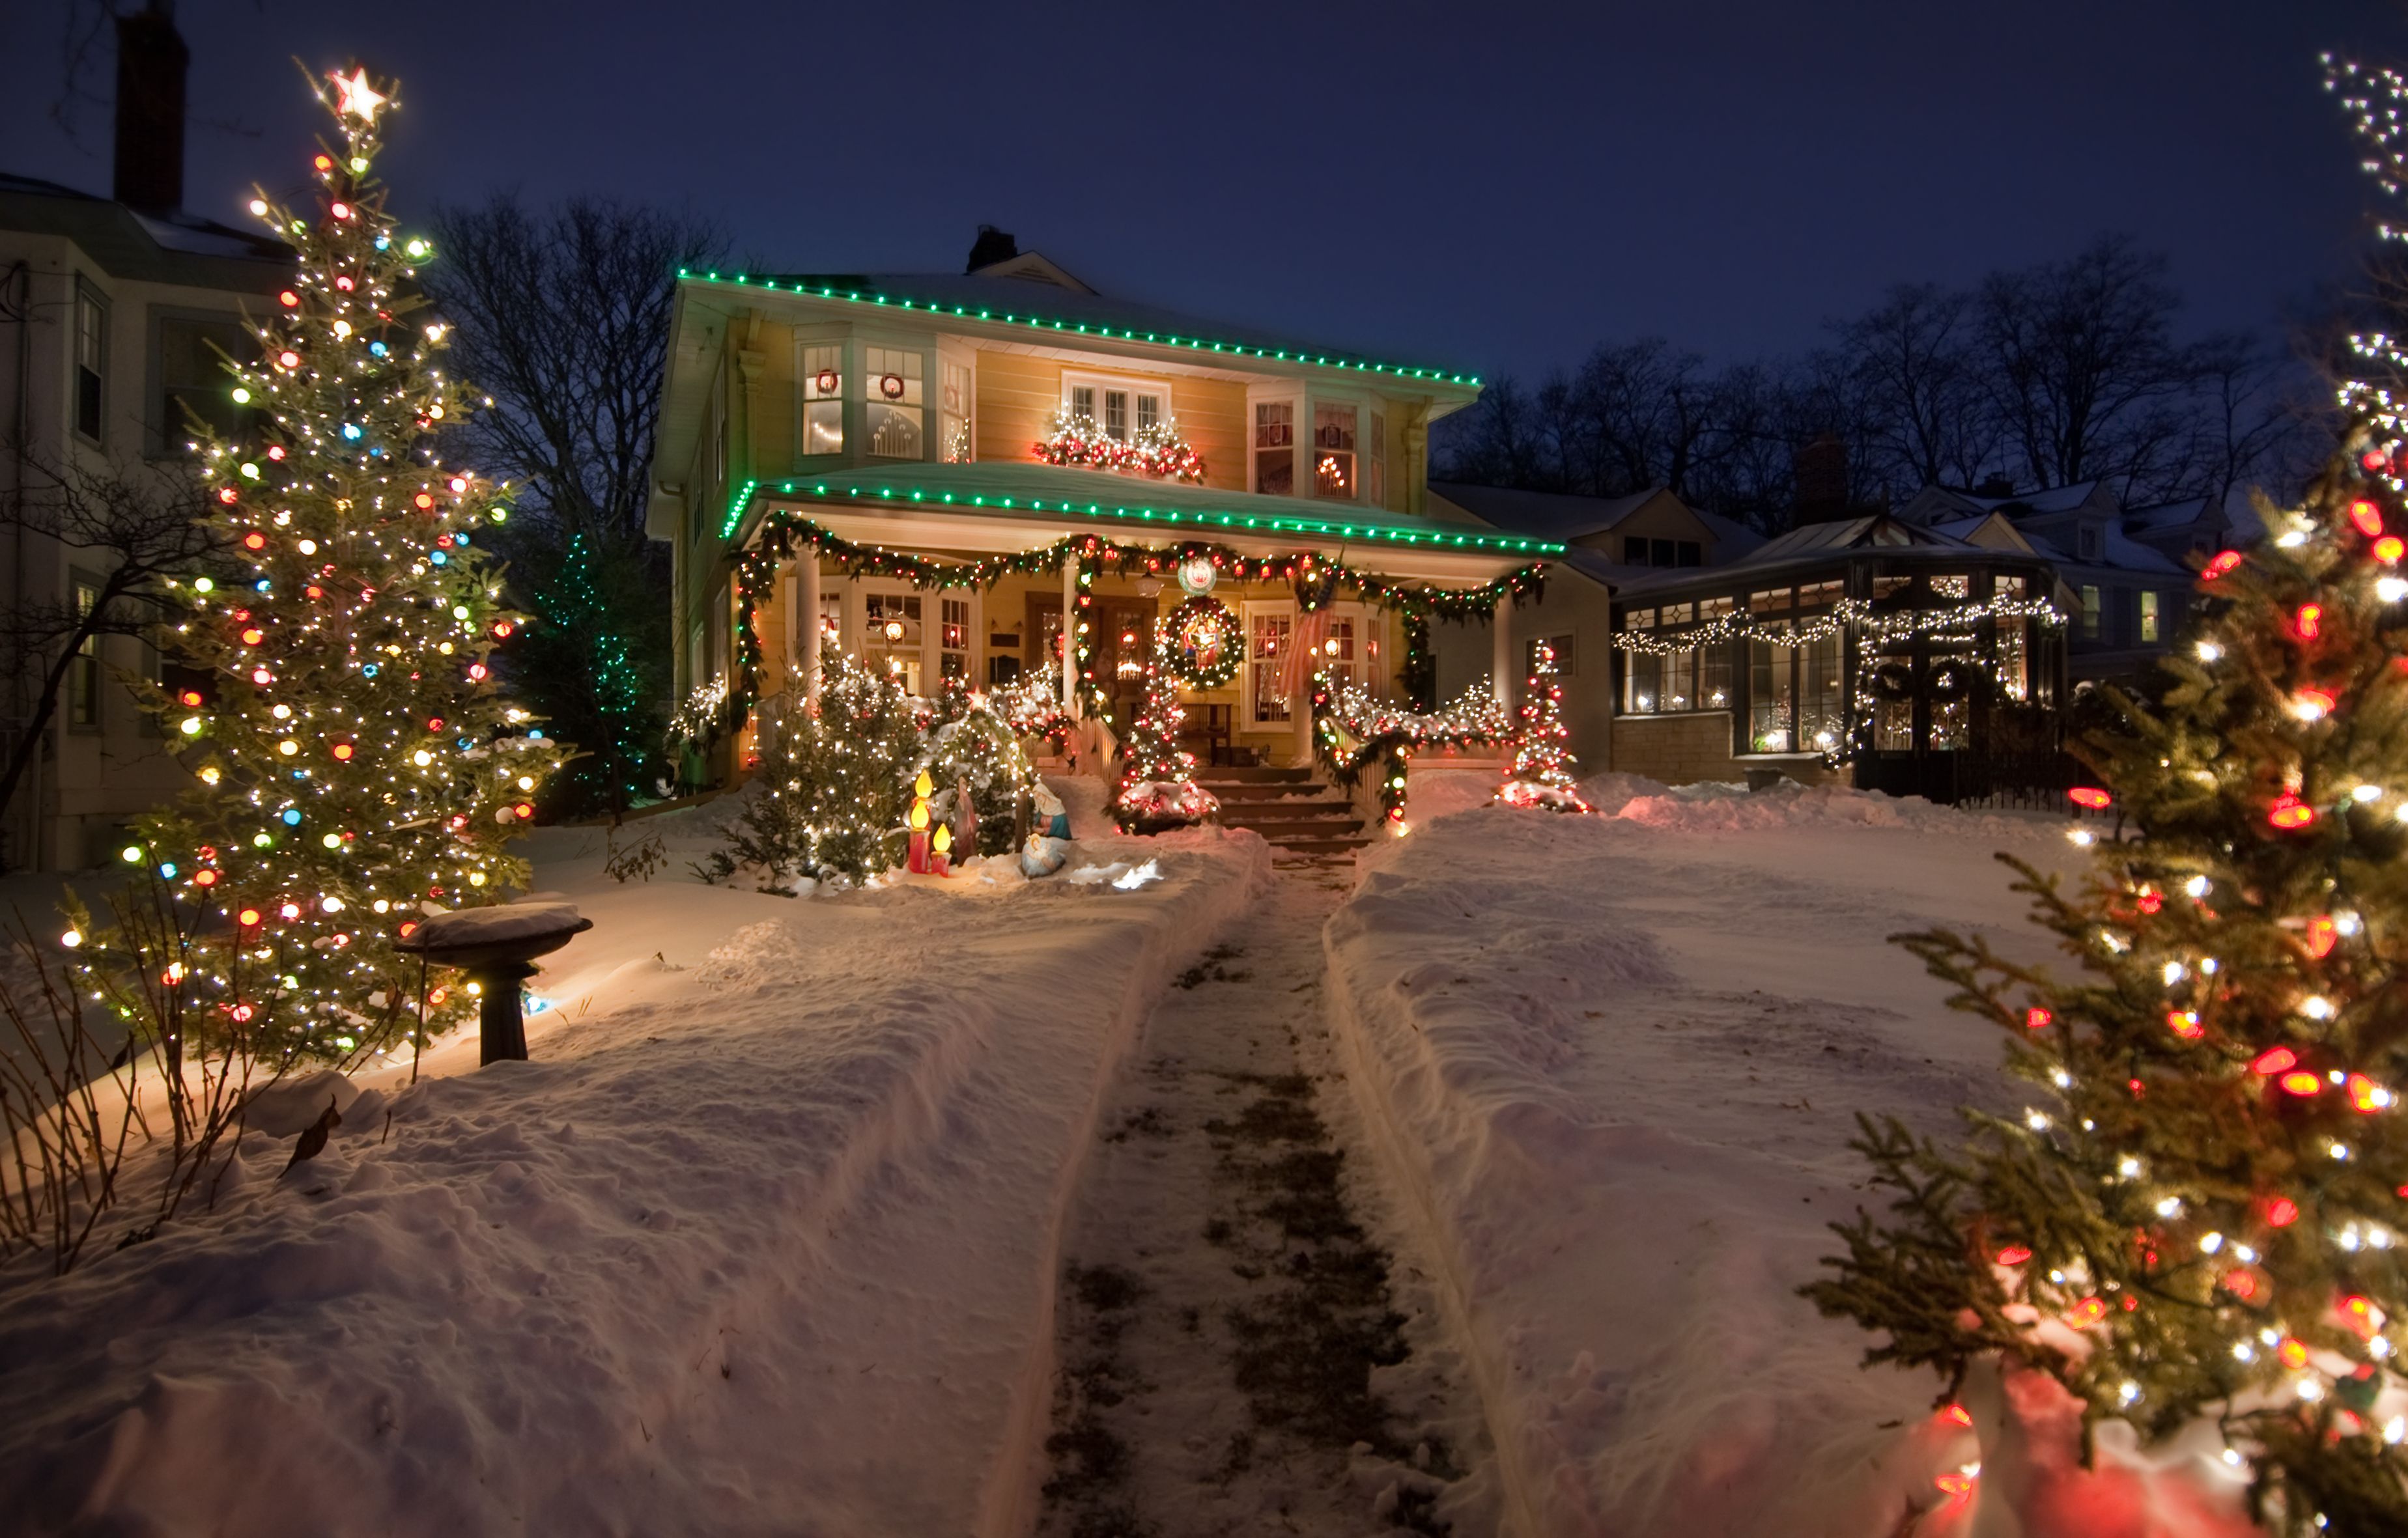 How to Enter Hallmark\'s Holiday Home Decoration Sweepstakes